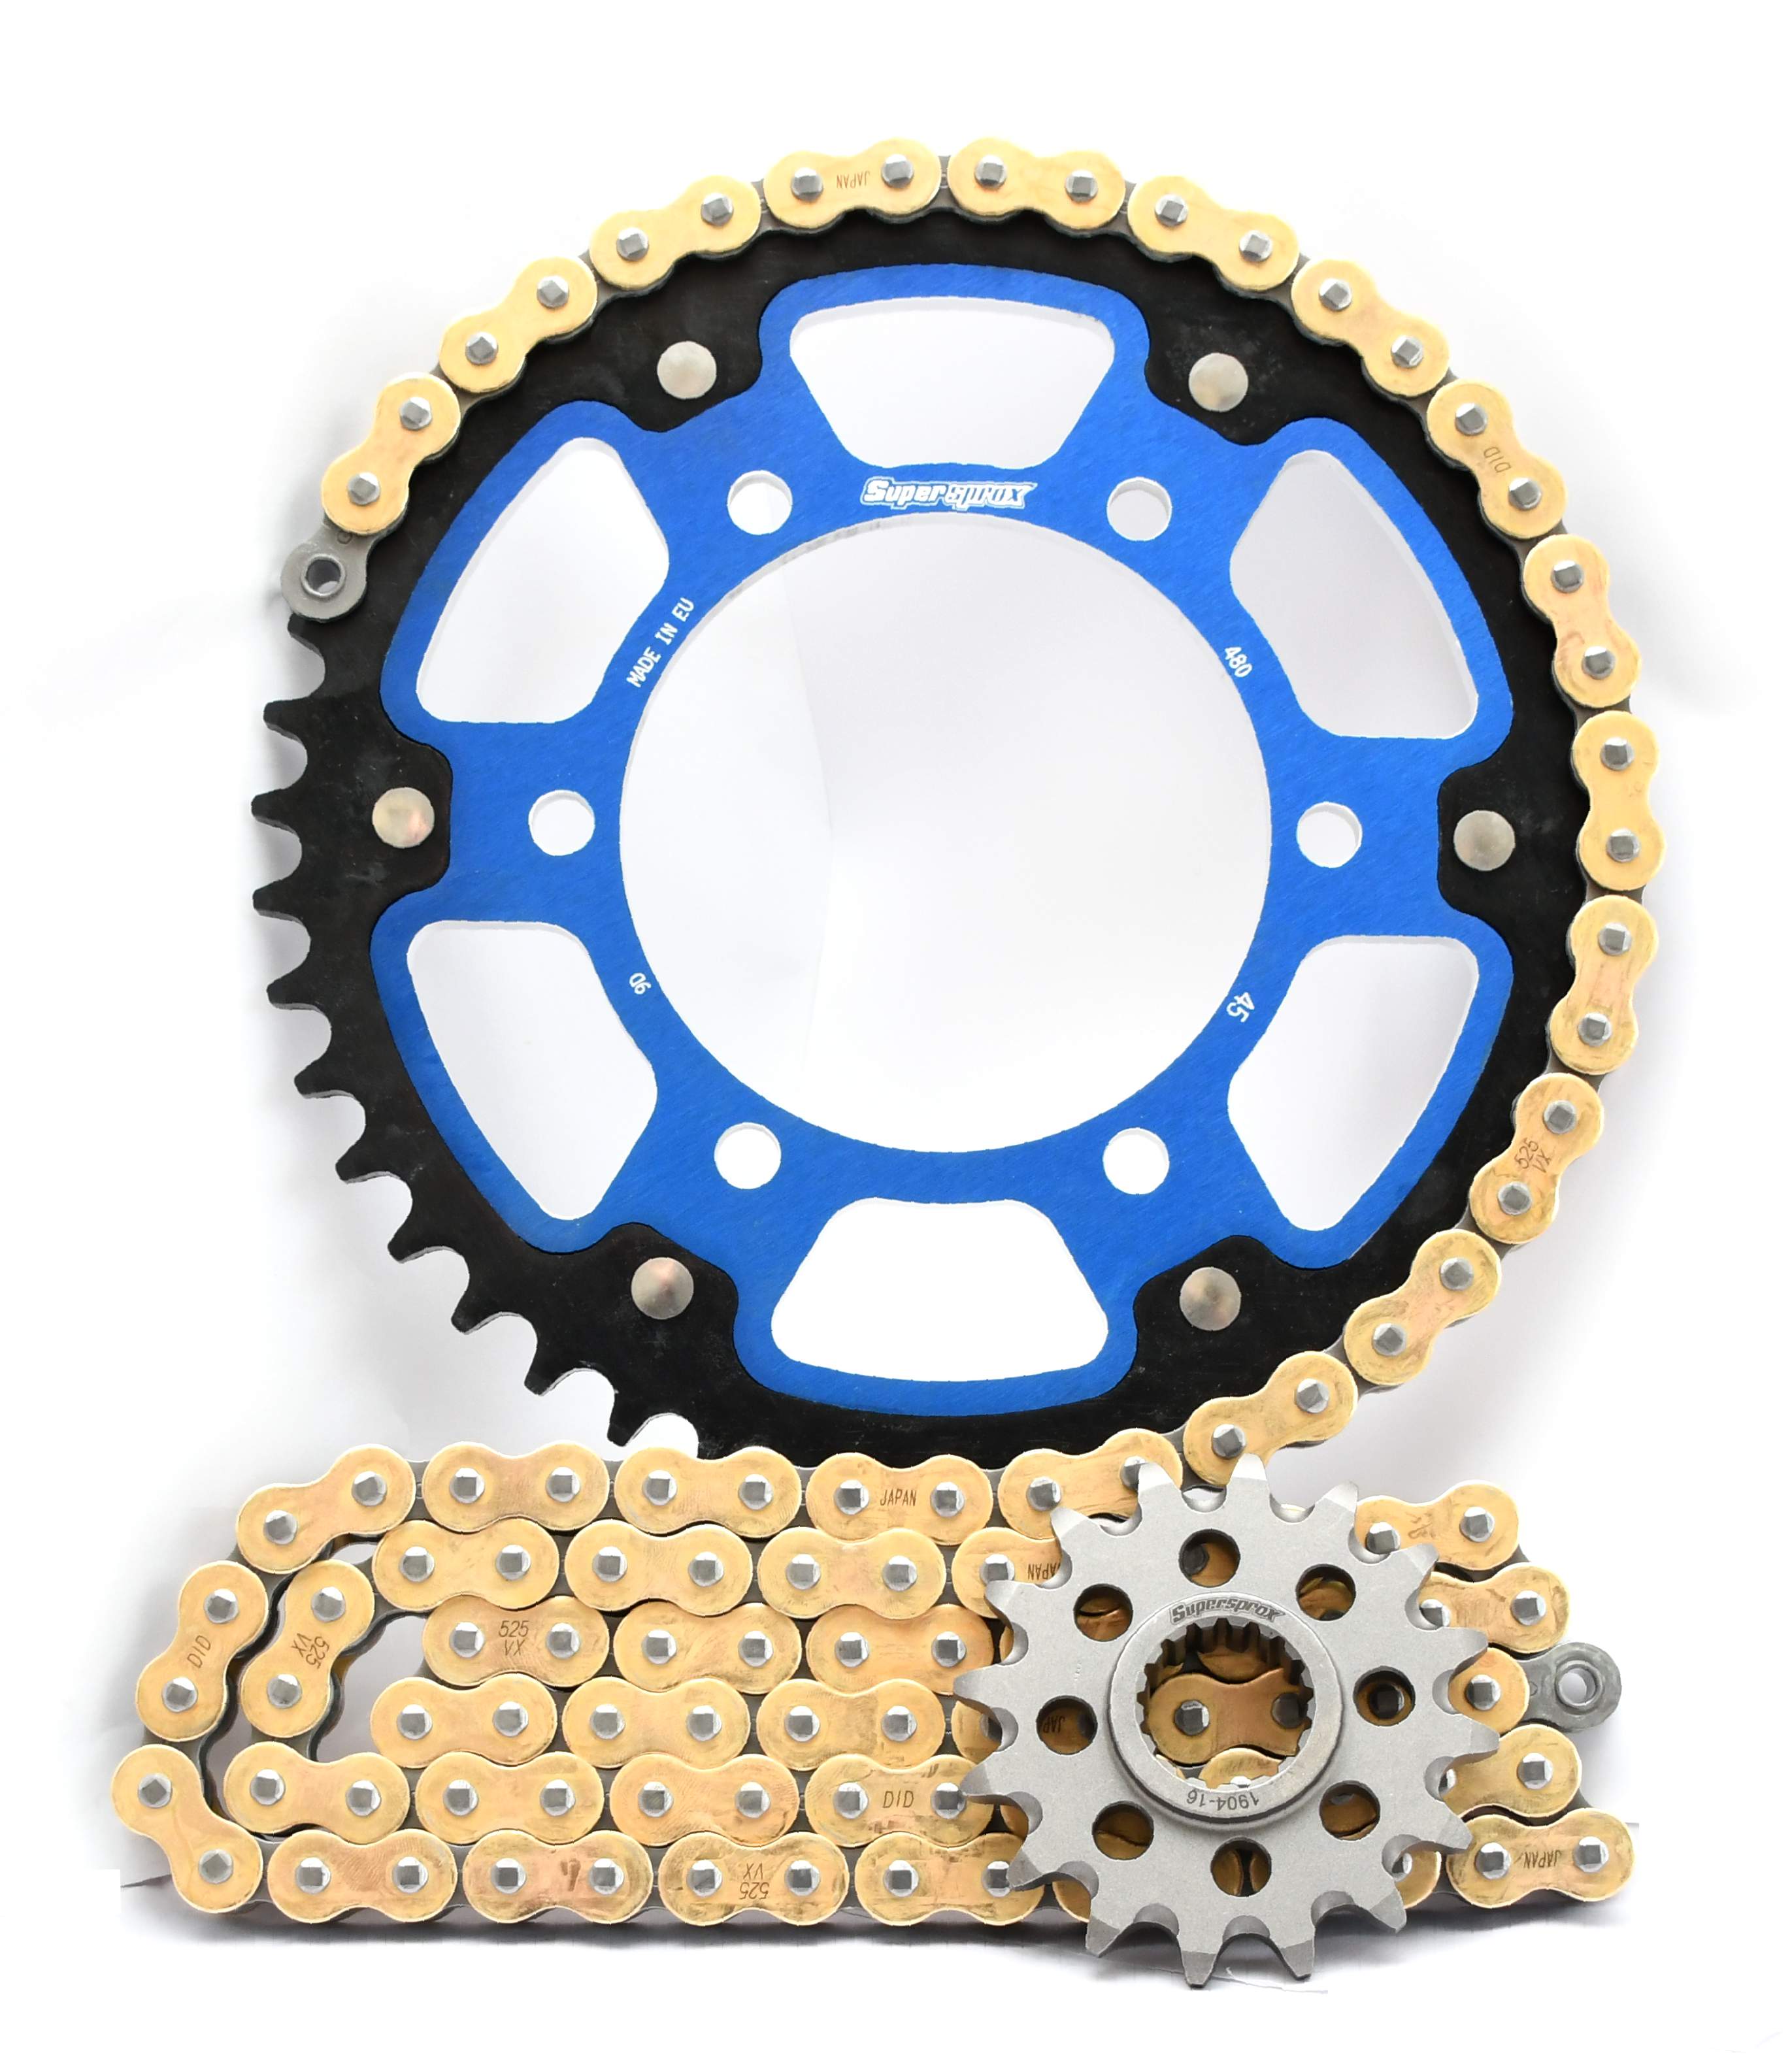 Supersprox Chain & Sprocket Kit for GSX-R 600/750 L1-L8 - Choose Your Gearing